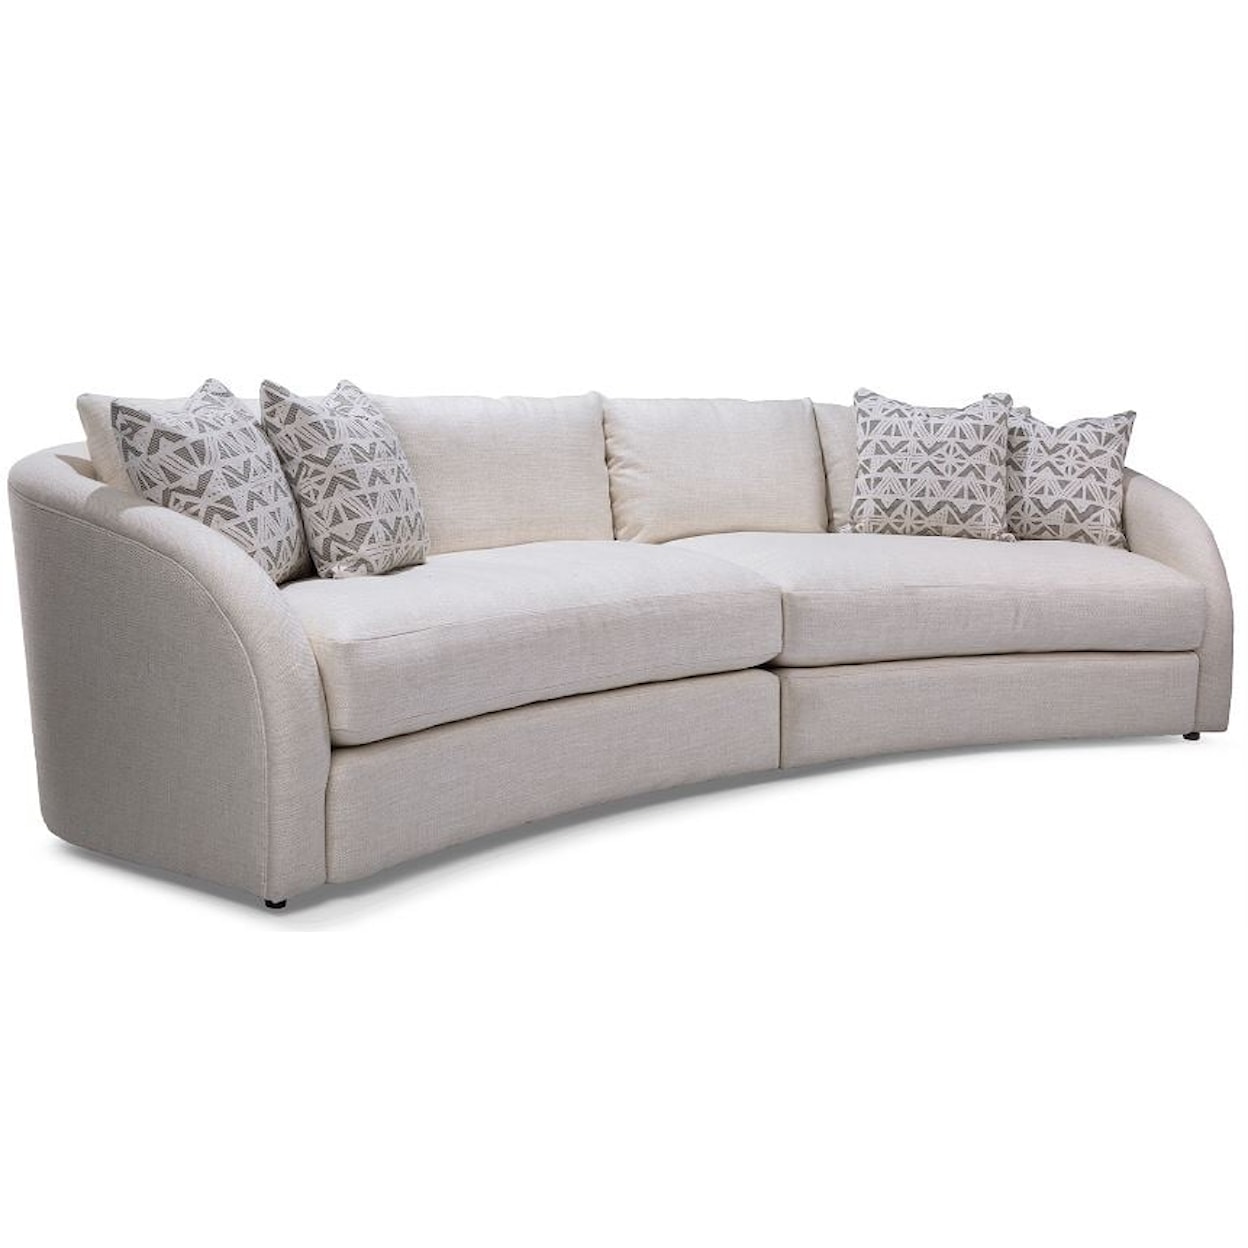 Taelor Designs 2239 2 Piece Sectional